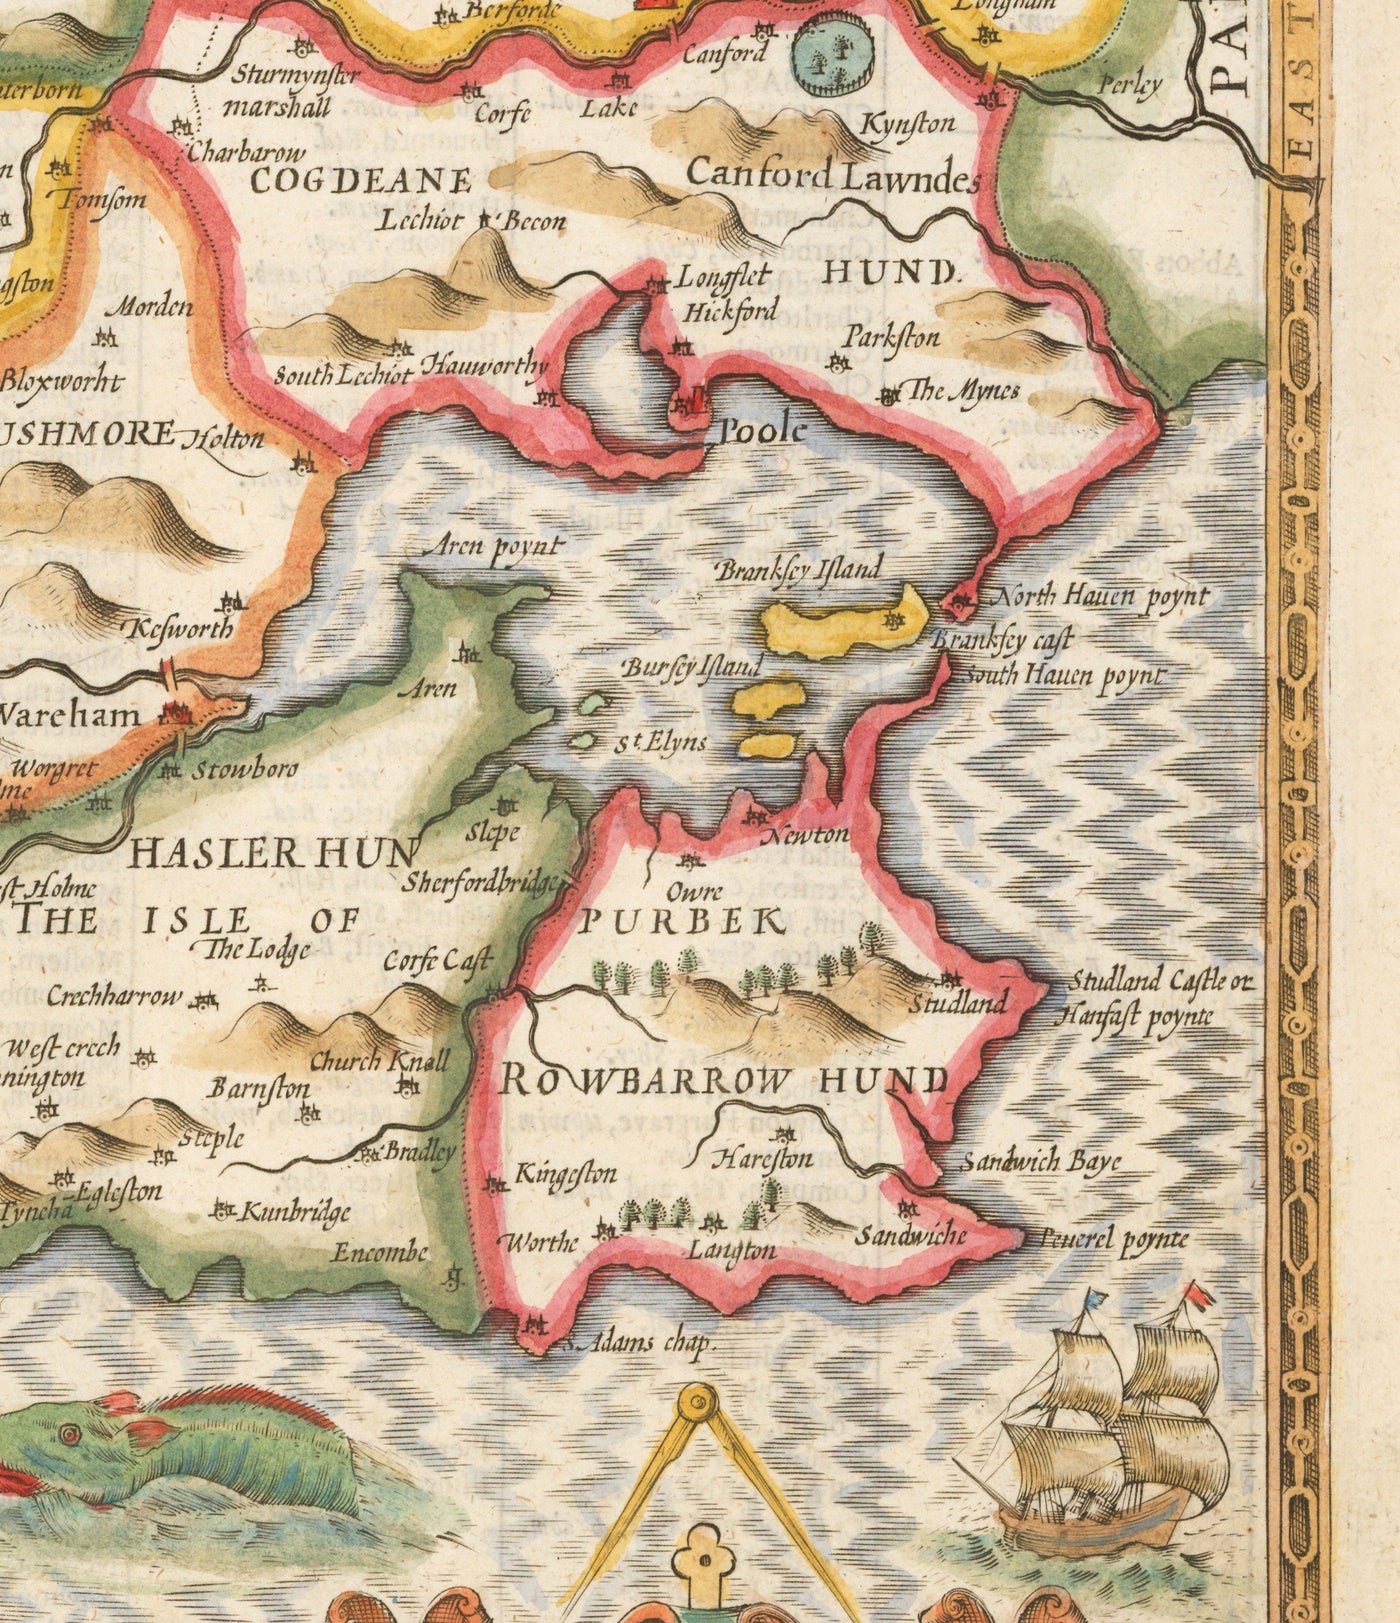 Old Map of Dorset in 1611 by John Speed - Poole, Weymouth, Dorchester, Bridport